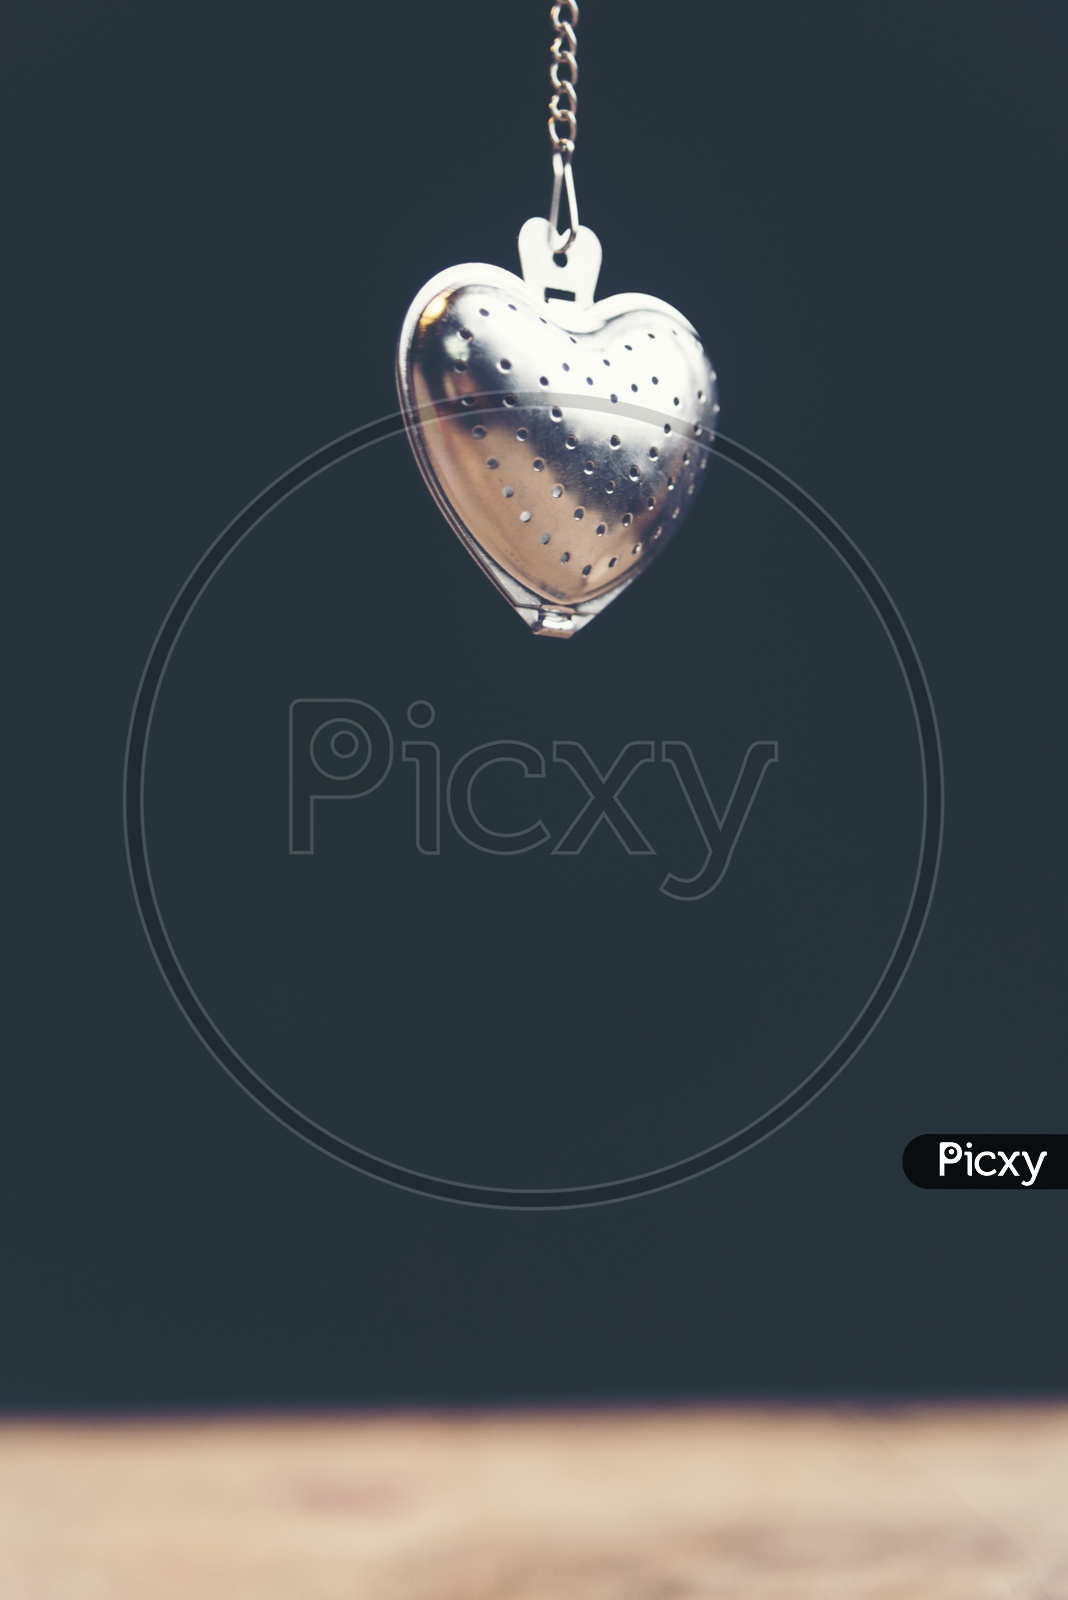 Heart shaped stainless steel locket with black background